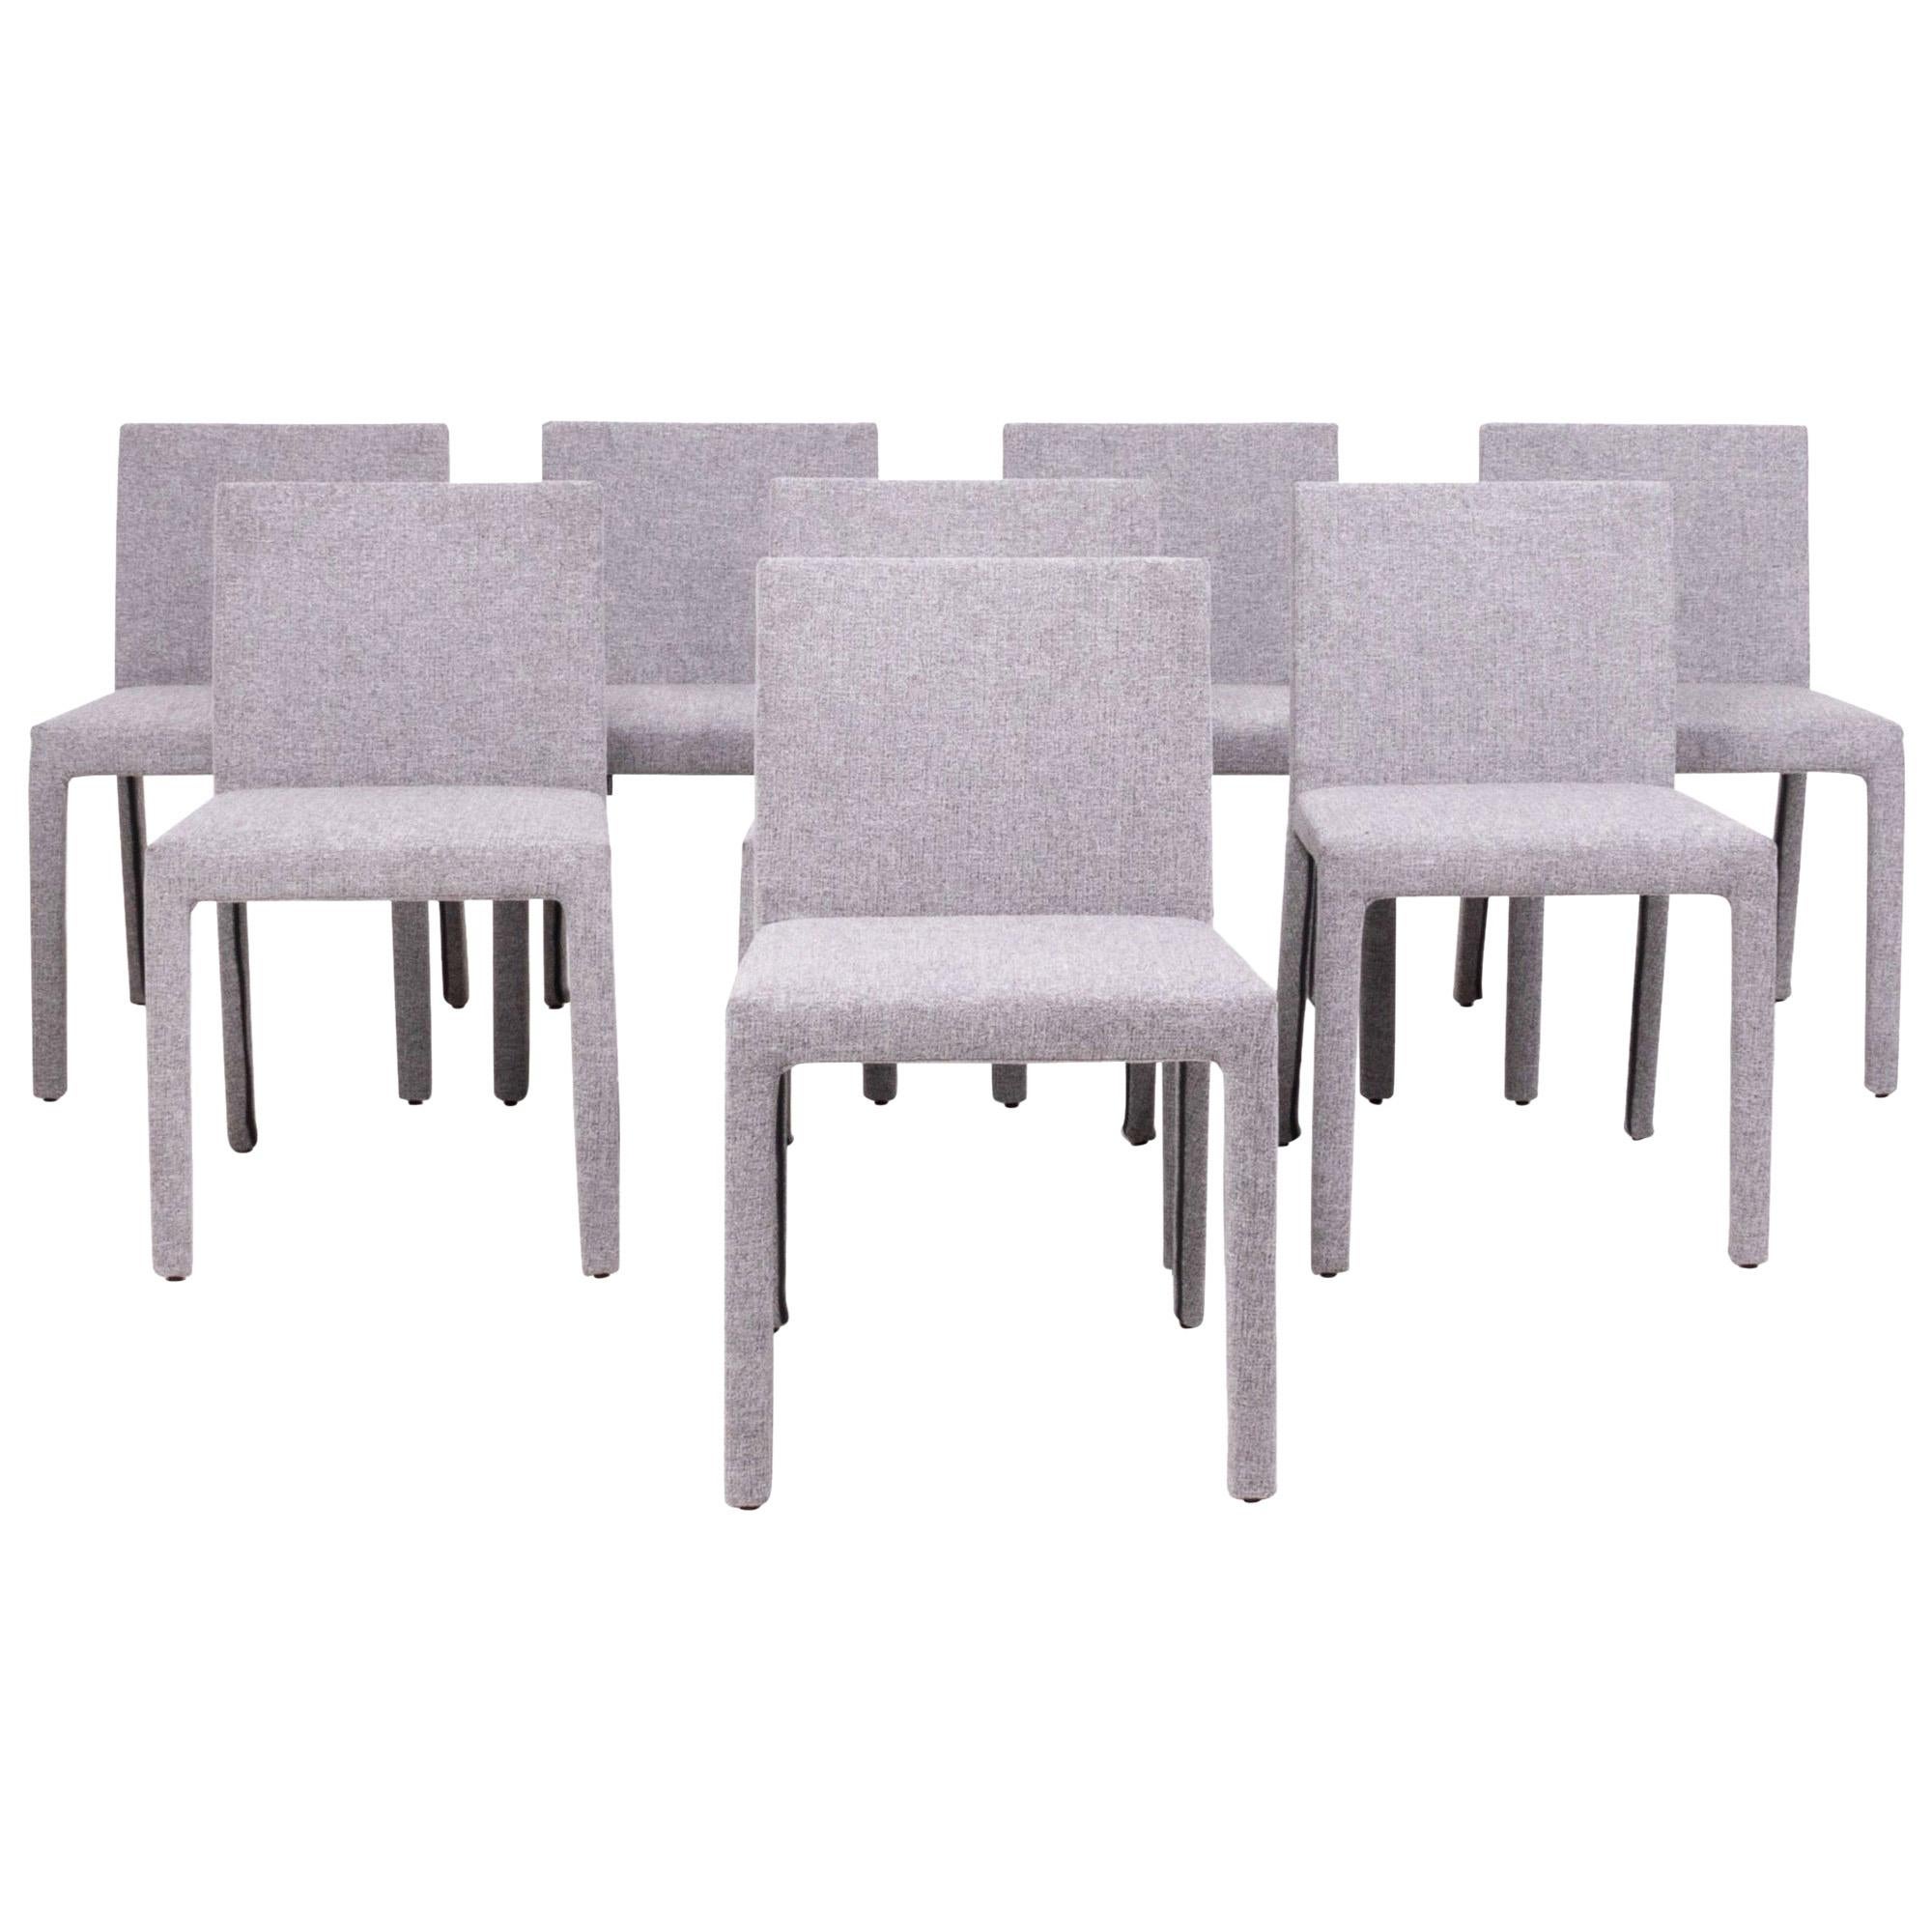 Poliform 'Fly Tre' Grey Dining Chairs by Carlo Colombo, Set of 8